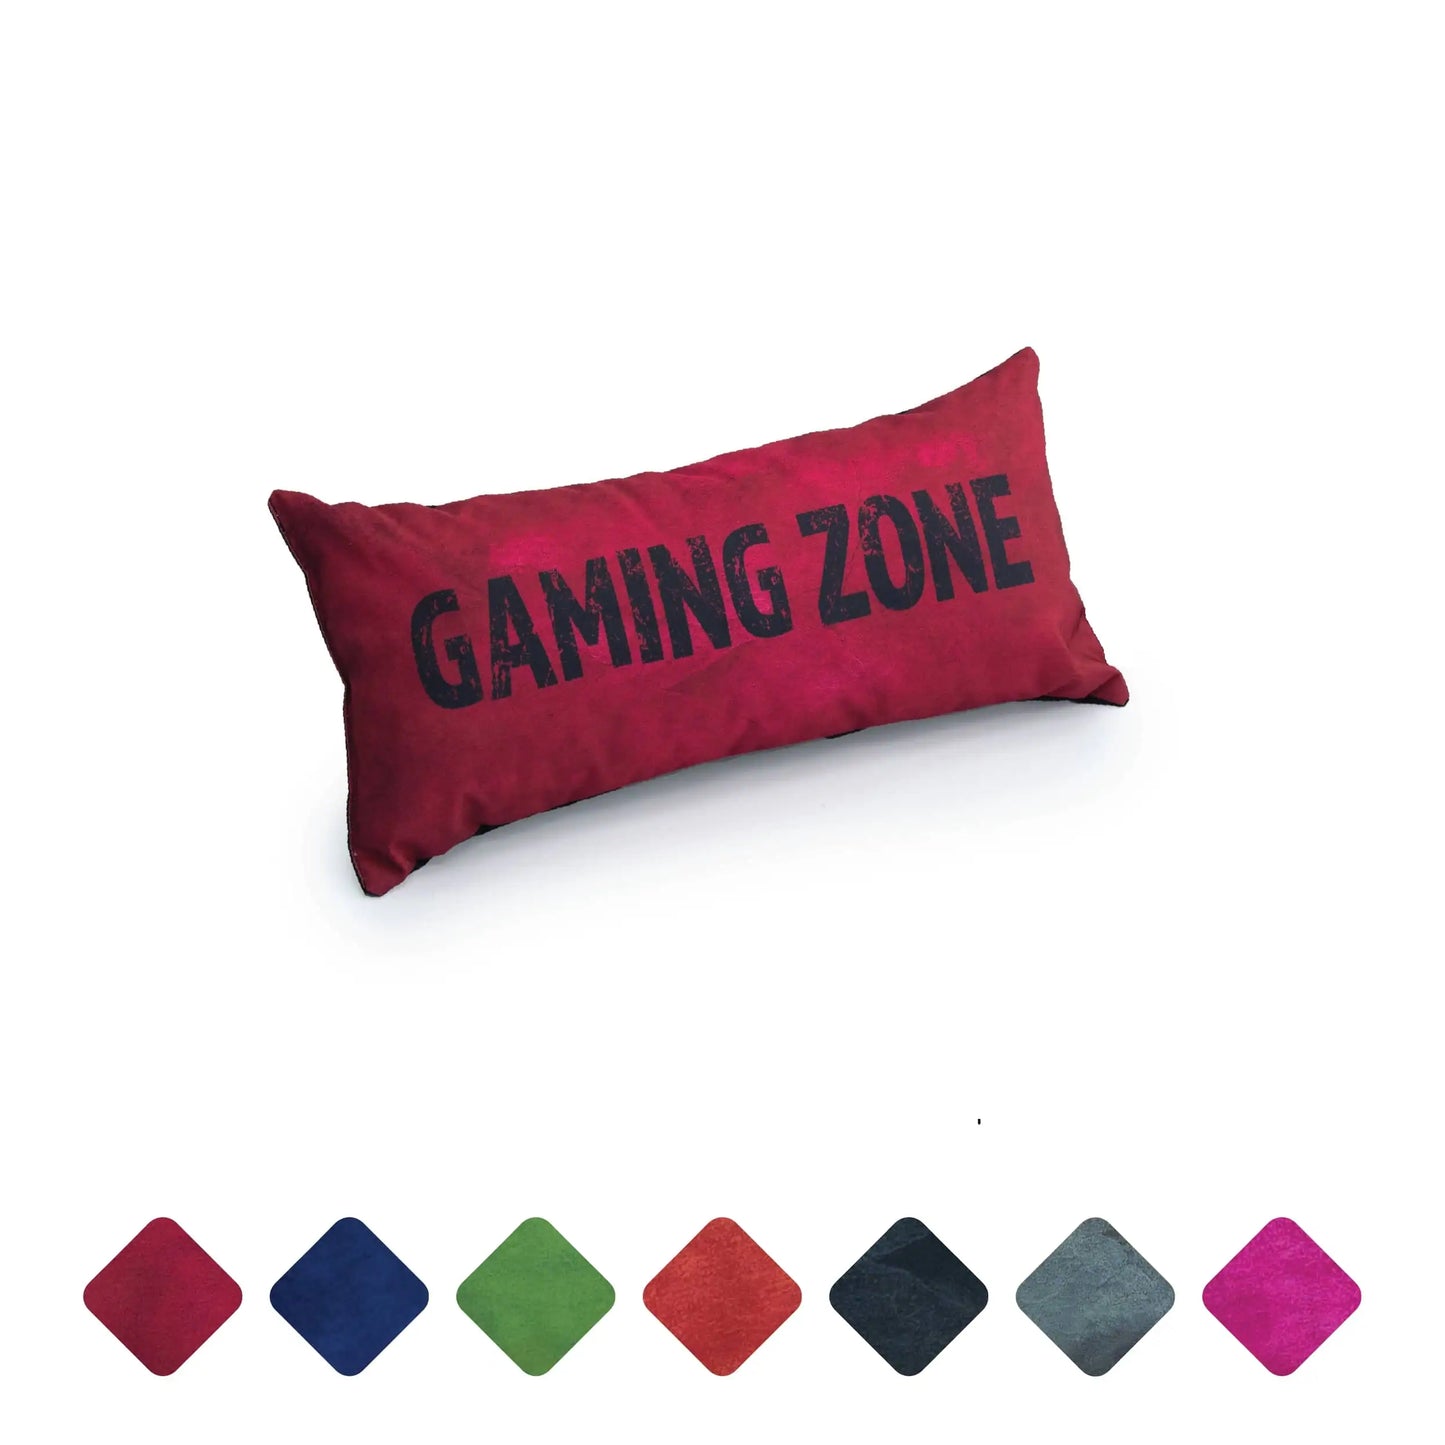 A red pillow with the words "GAMING ZONE" written on it.